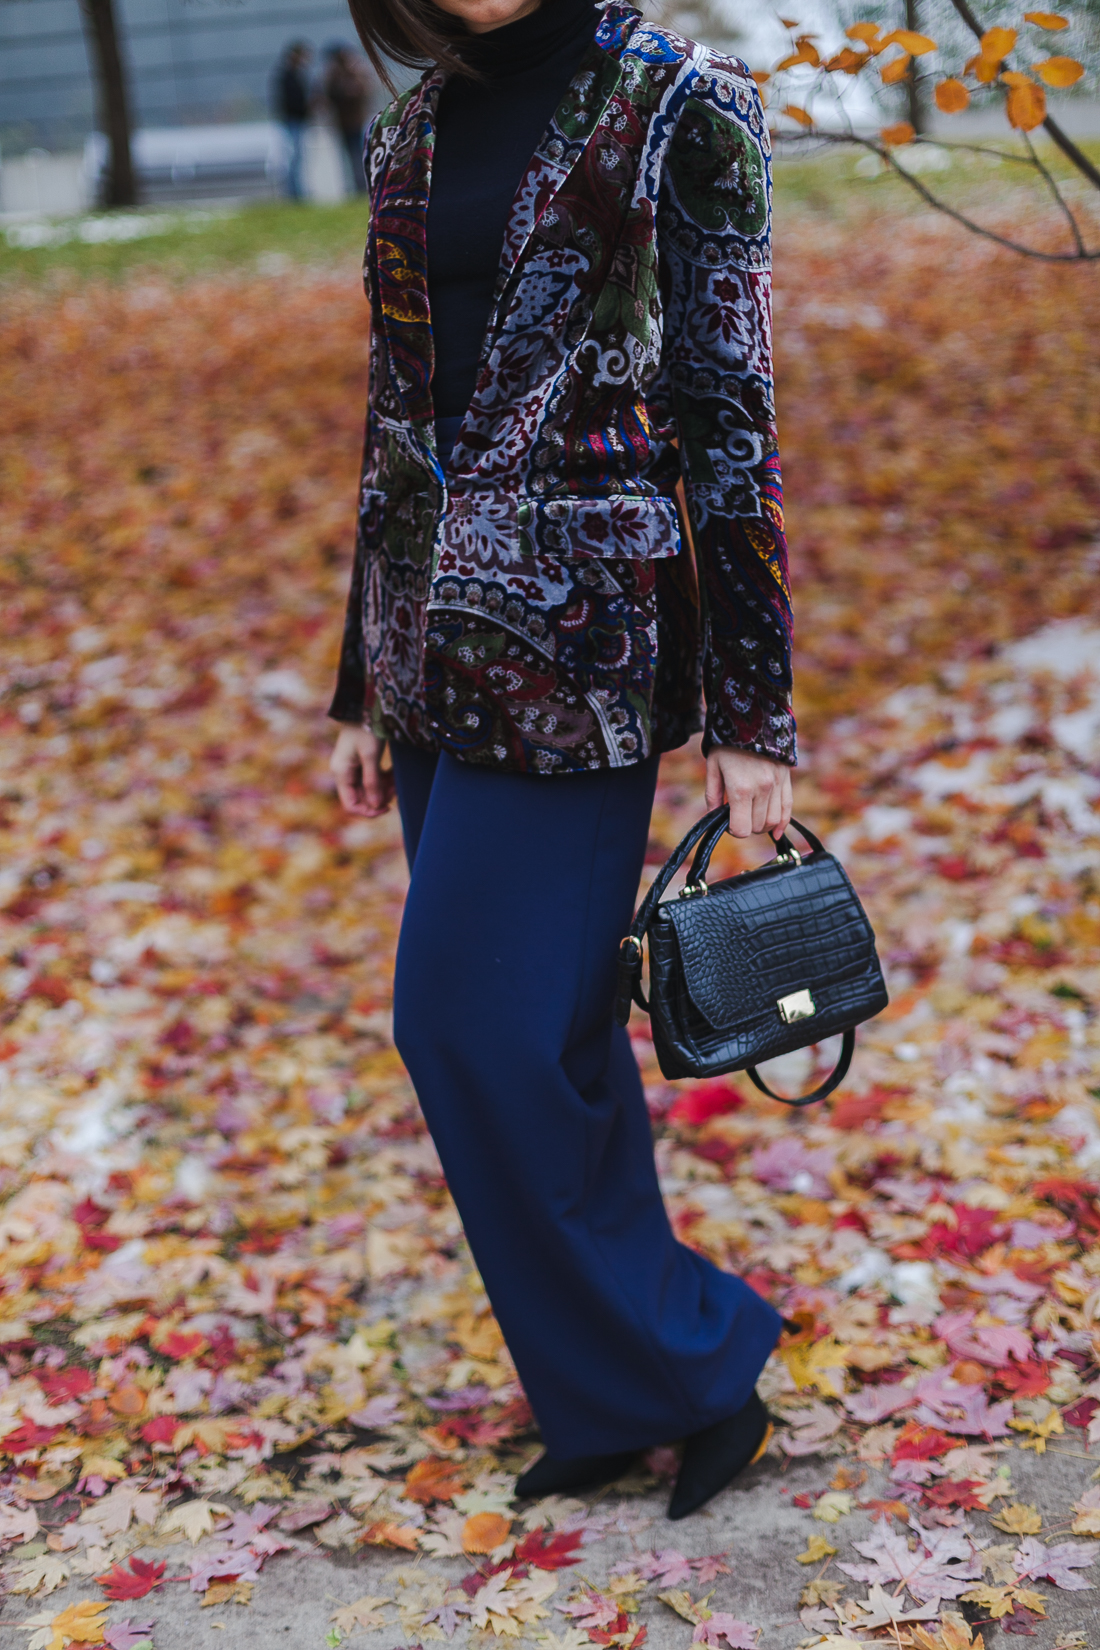 Yana Frigelis of NoMad Luxuries wearinga velvet paisley blazer, high-waisted navy pants for Thanksgiving with a 70's vibe in Chicago